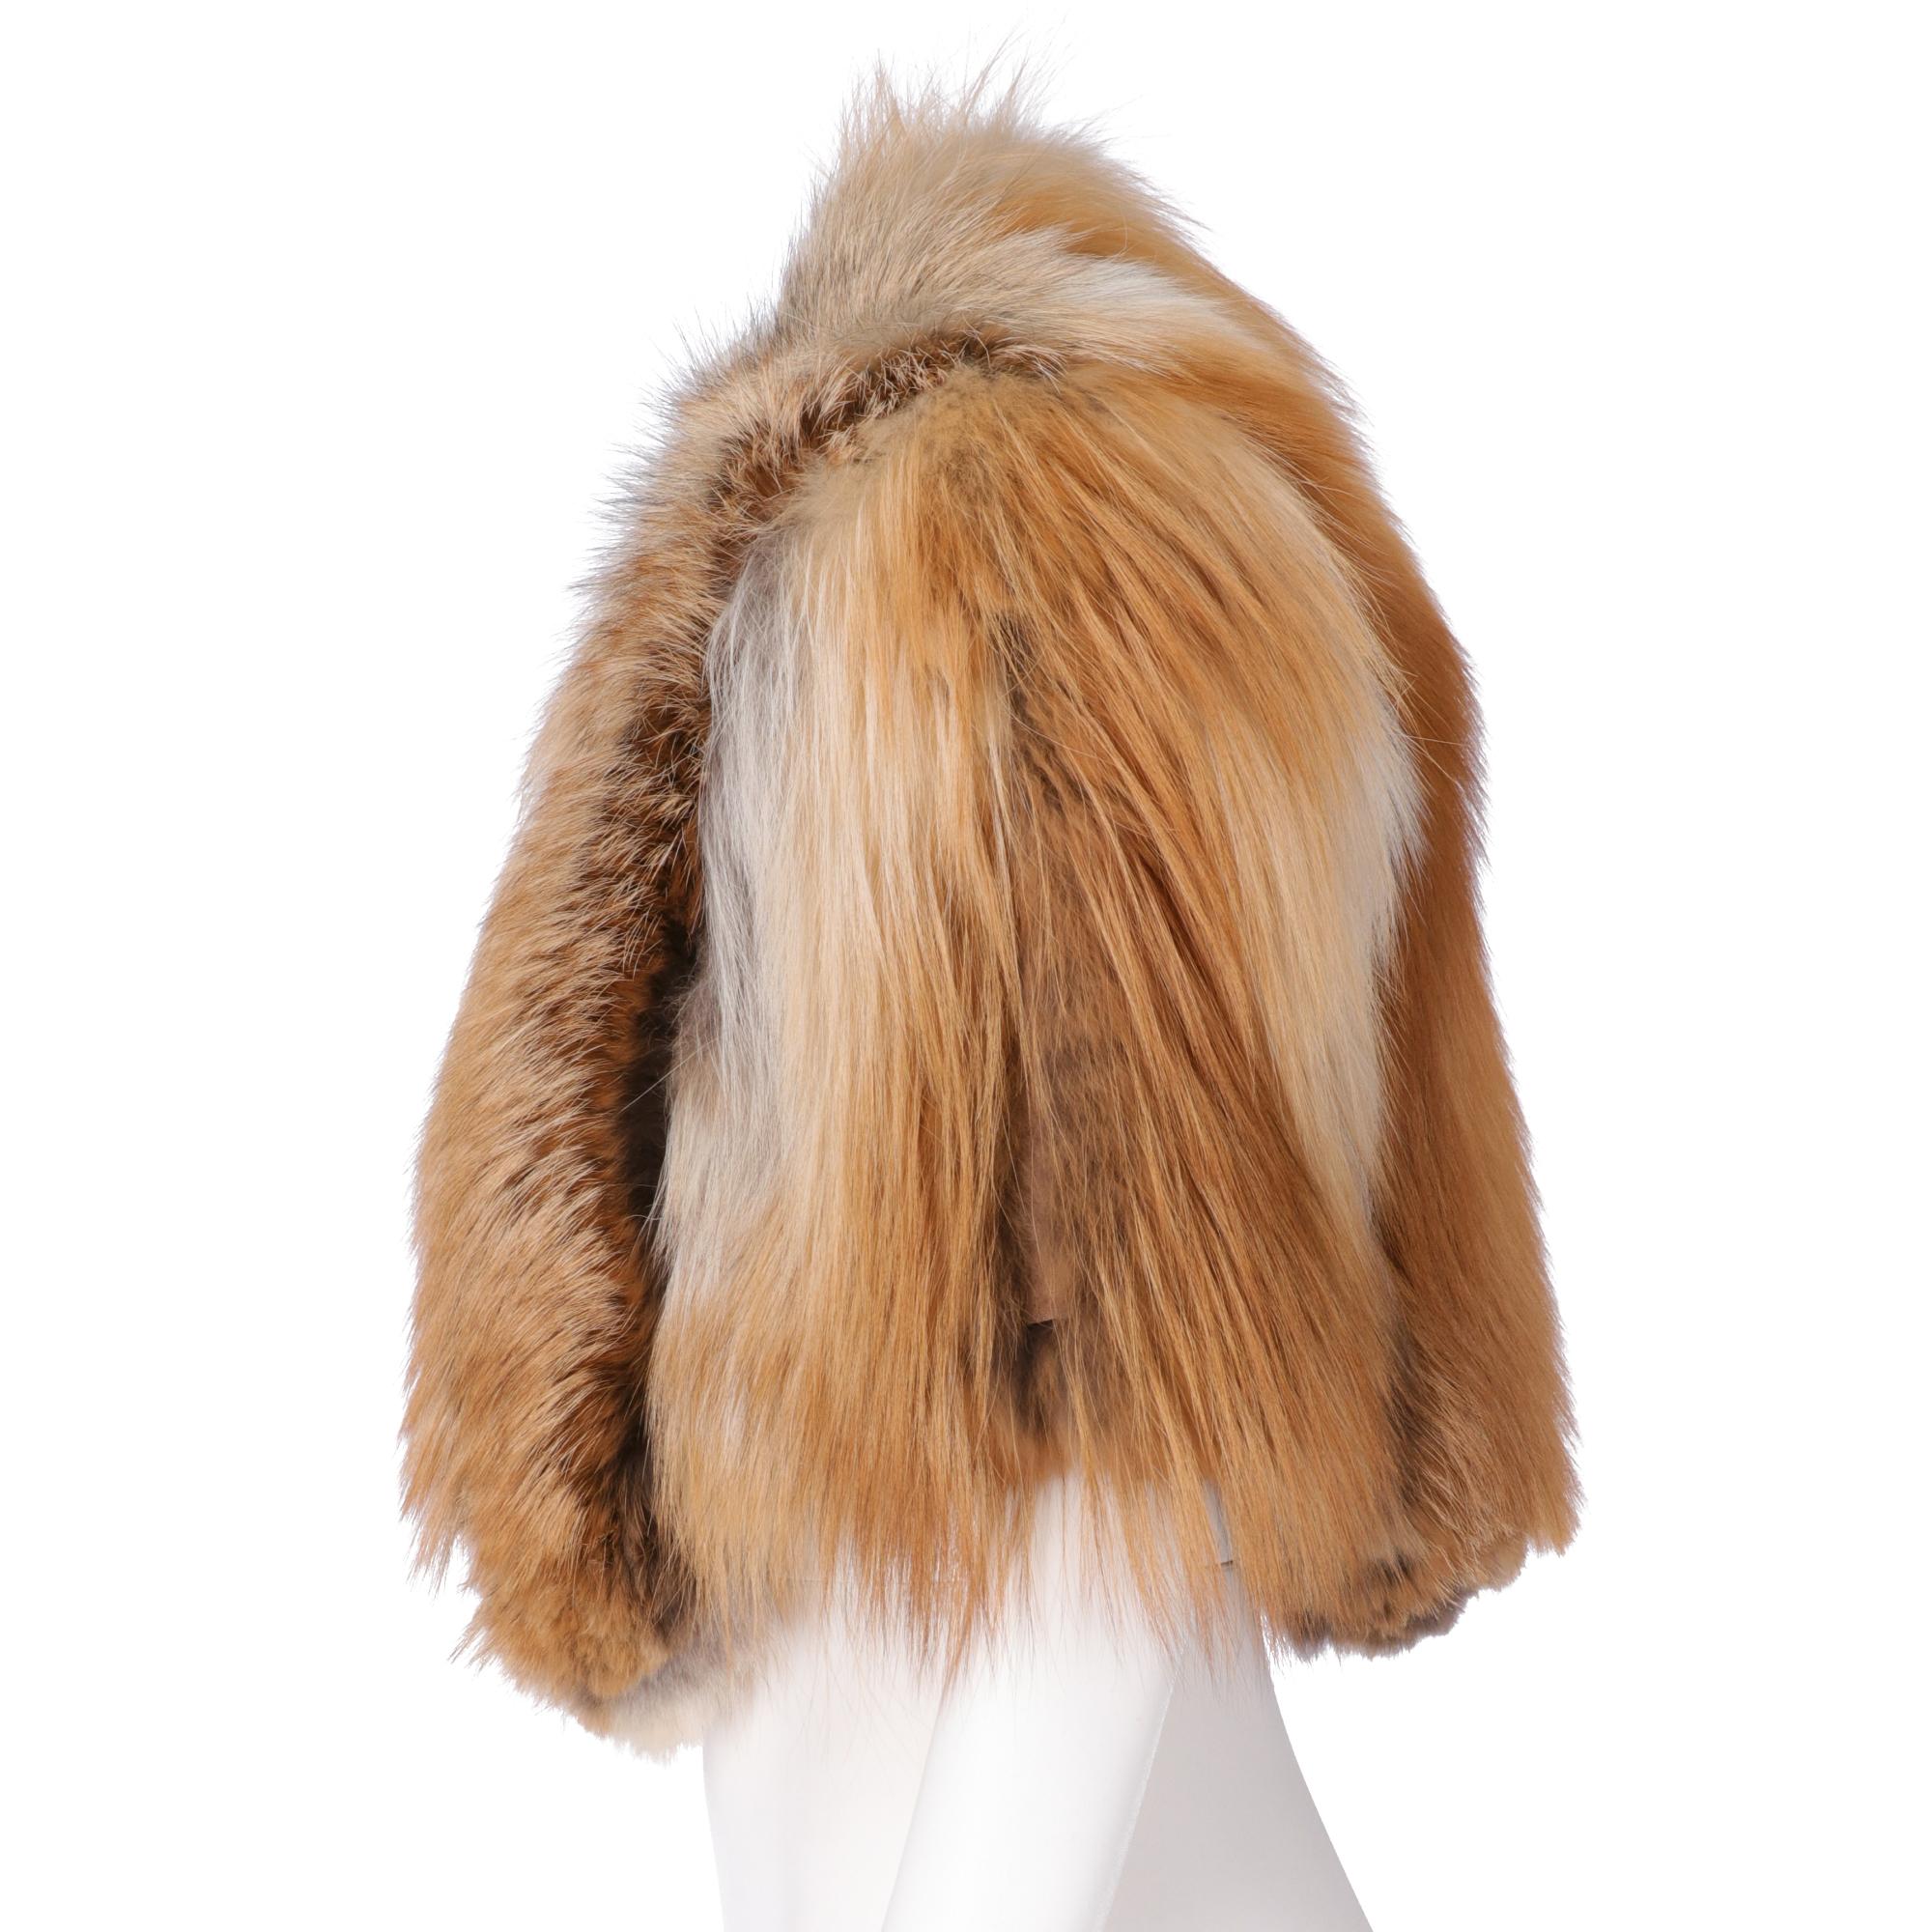 Gianfranco Ferrè real golden fox fur short to the waist cape, with padded shoulders, elastic bands and hooks for the arms, lined in silk fabric and front closure with hook and chain.

This item belongs to an original vintage stock: it has never been